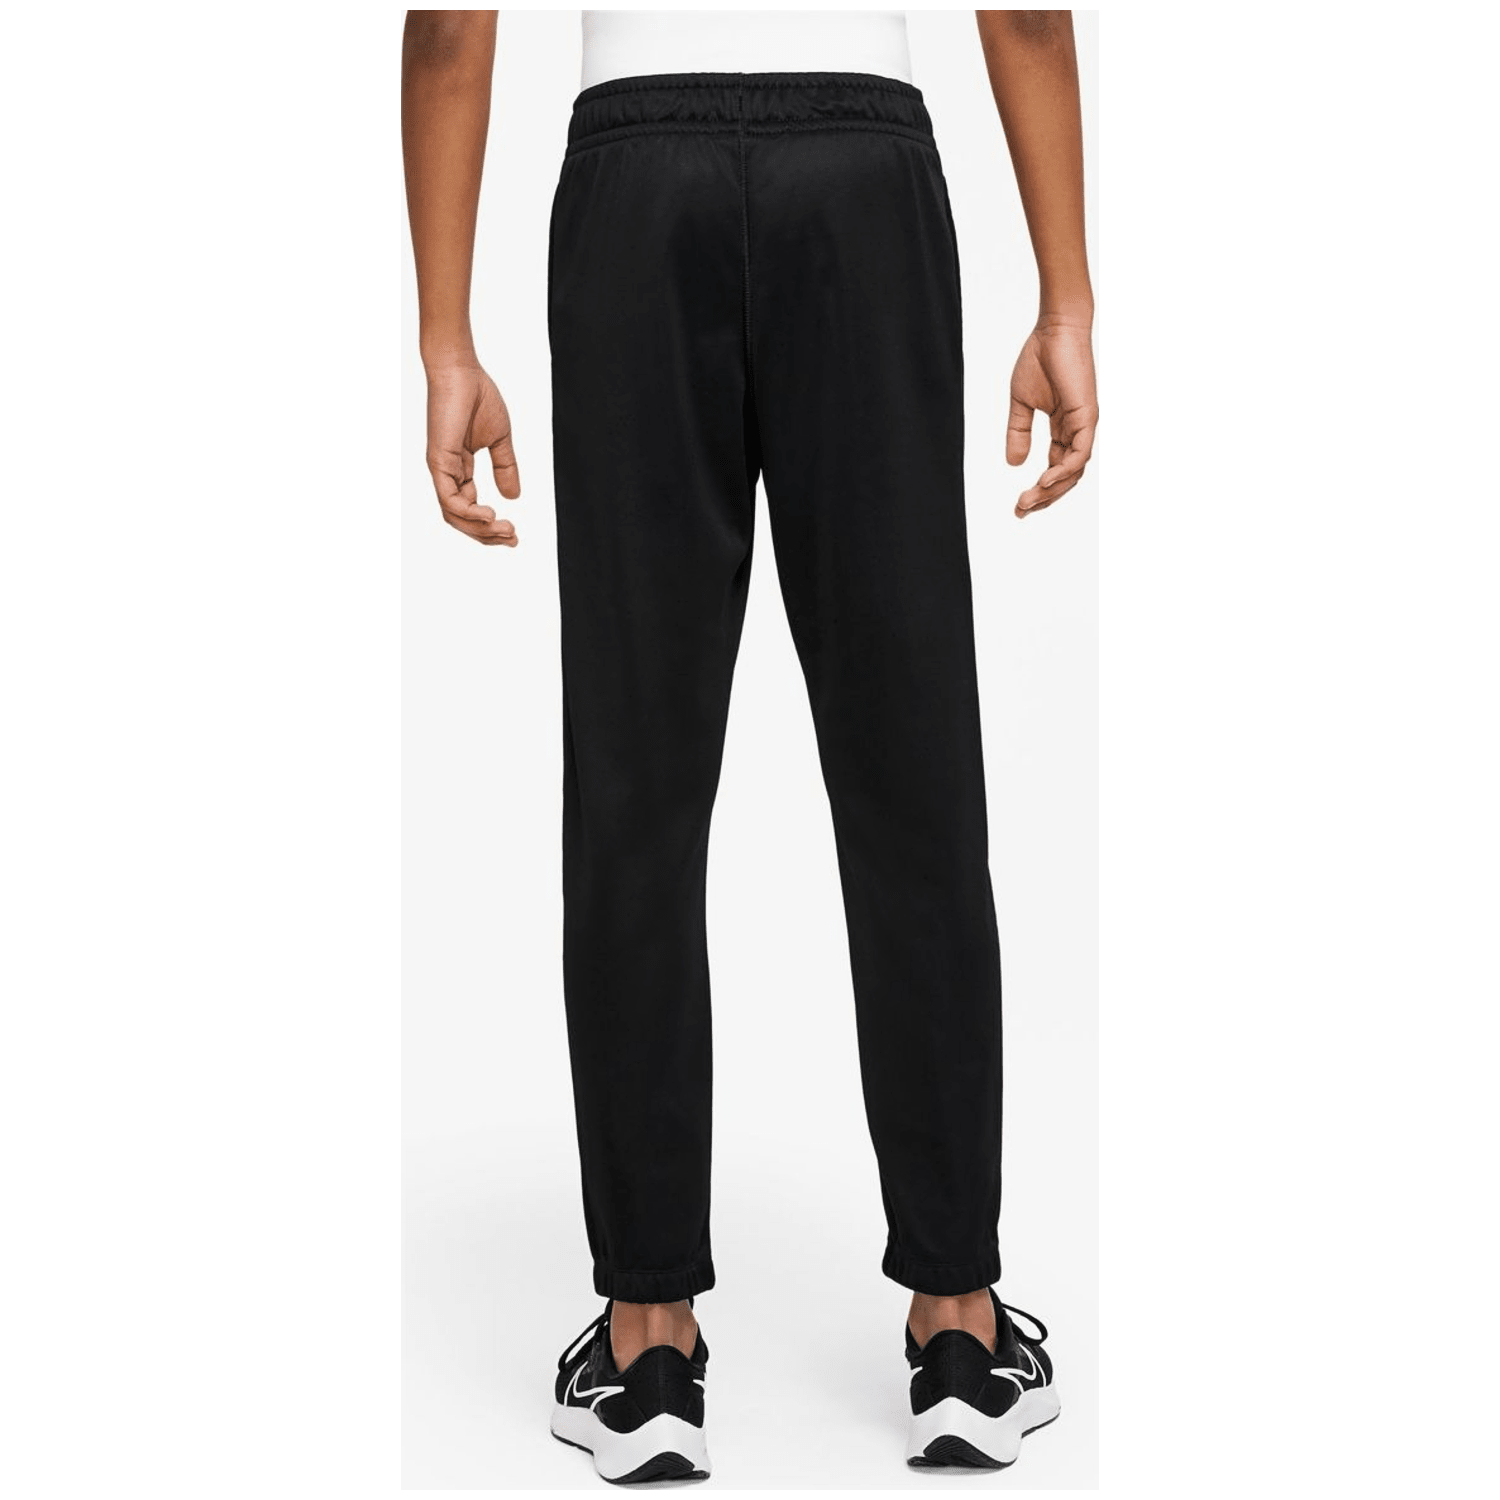 Nike Therma-FIT Tapered Training Jungen Trainingshose